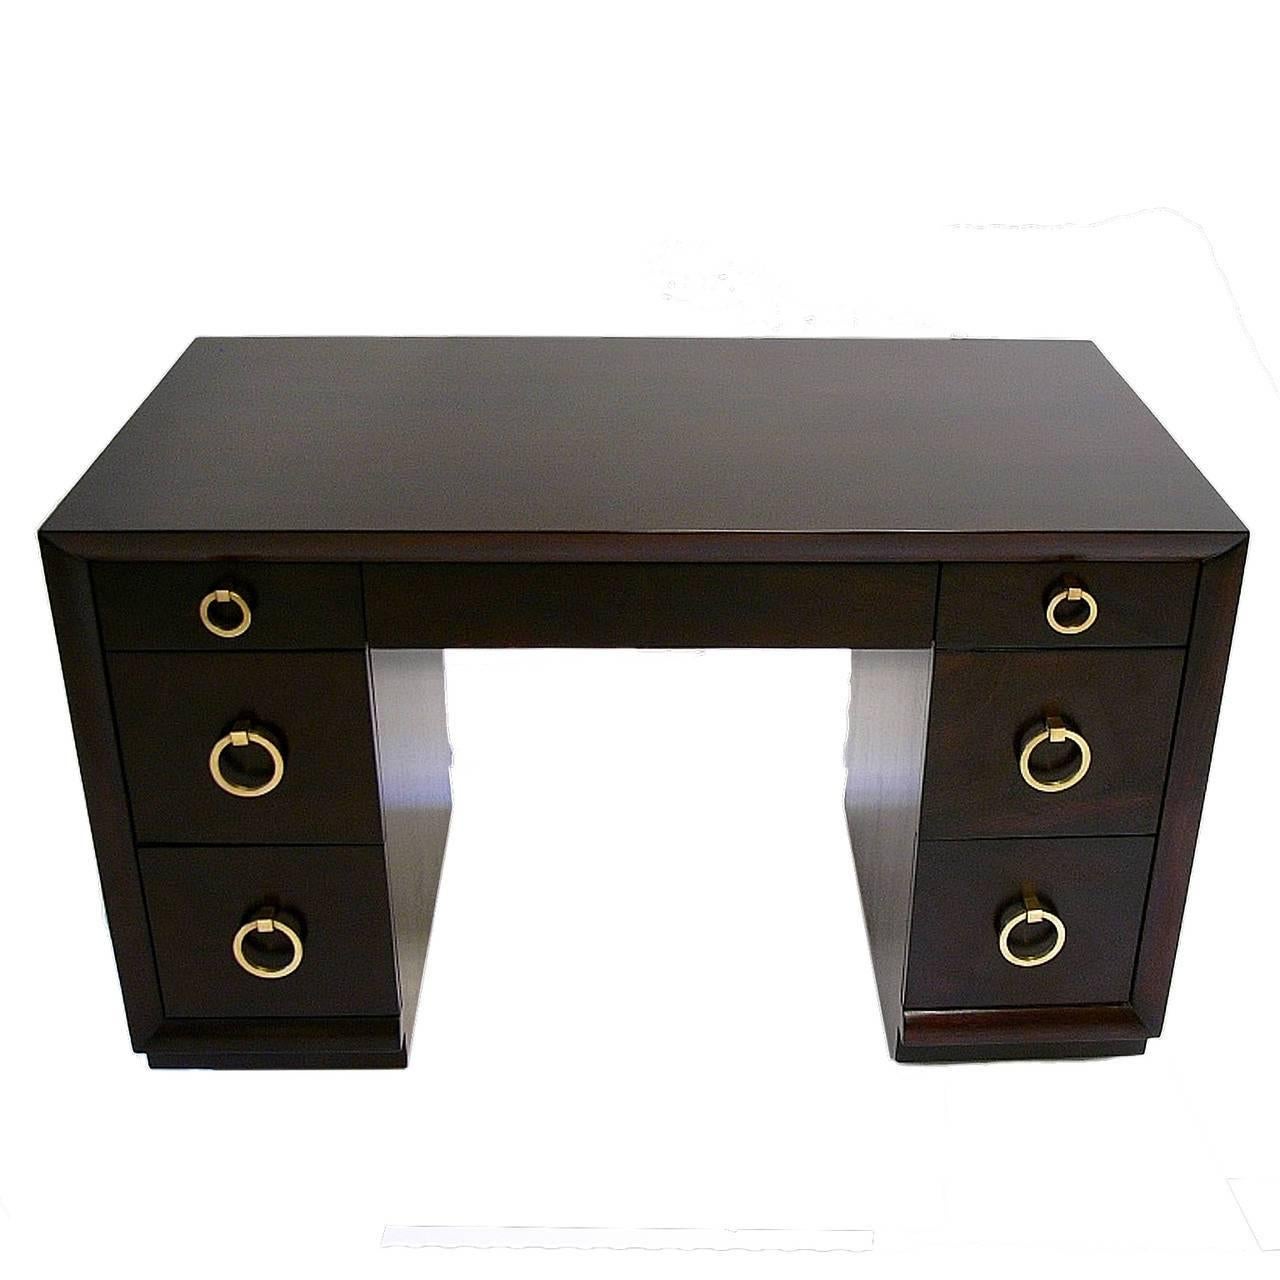 A Classic kneehole desk, completely re-finished on both sides in a sable brown stain. Polished signature round brass door knocker drawer pulls and a centre pencil drawer. Original brass label and paper tag intact. Model no. 317, by T.H.